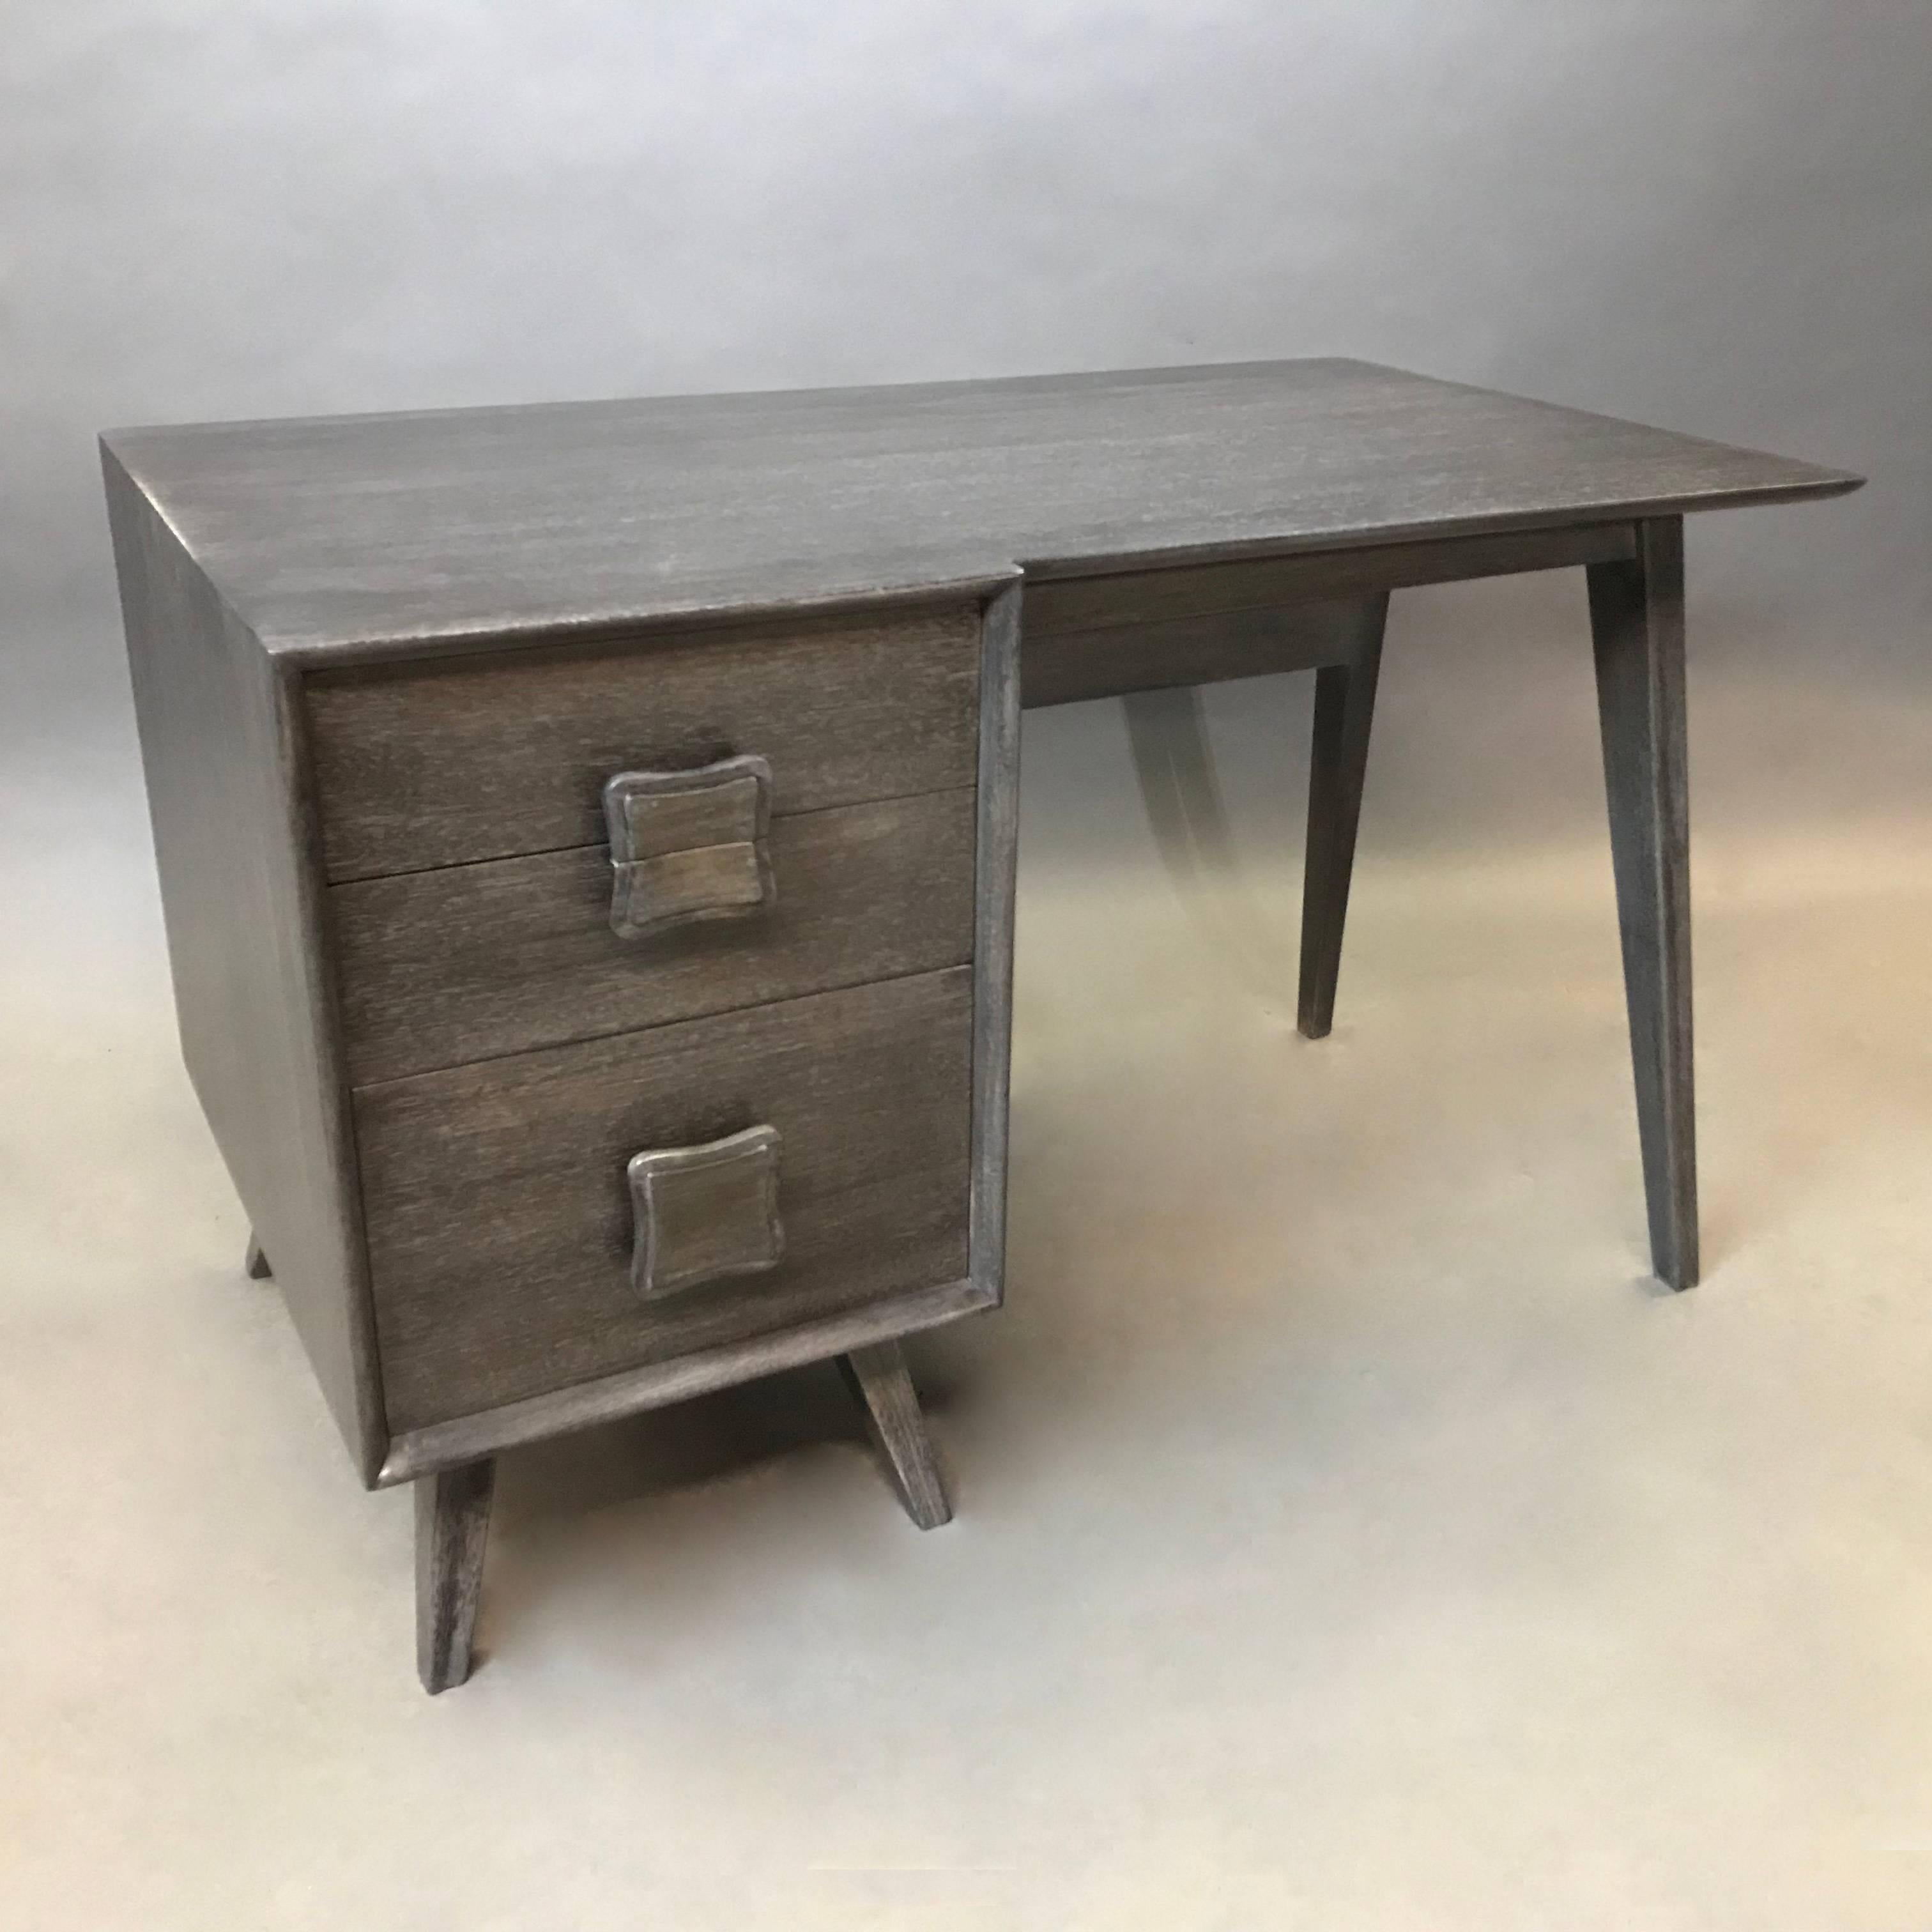 Mid-Century Modern, ebonized ash, single pedestal desk features decorative pulls on it's three drawers, tapered legs and a display shelf in the front so the desk is presentable on all sides.